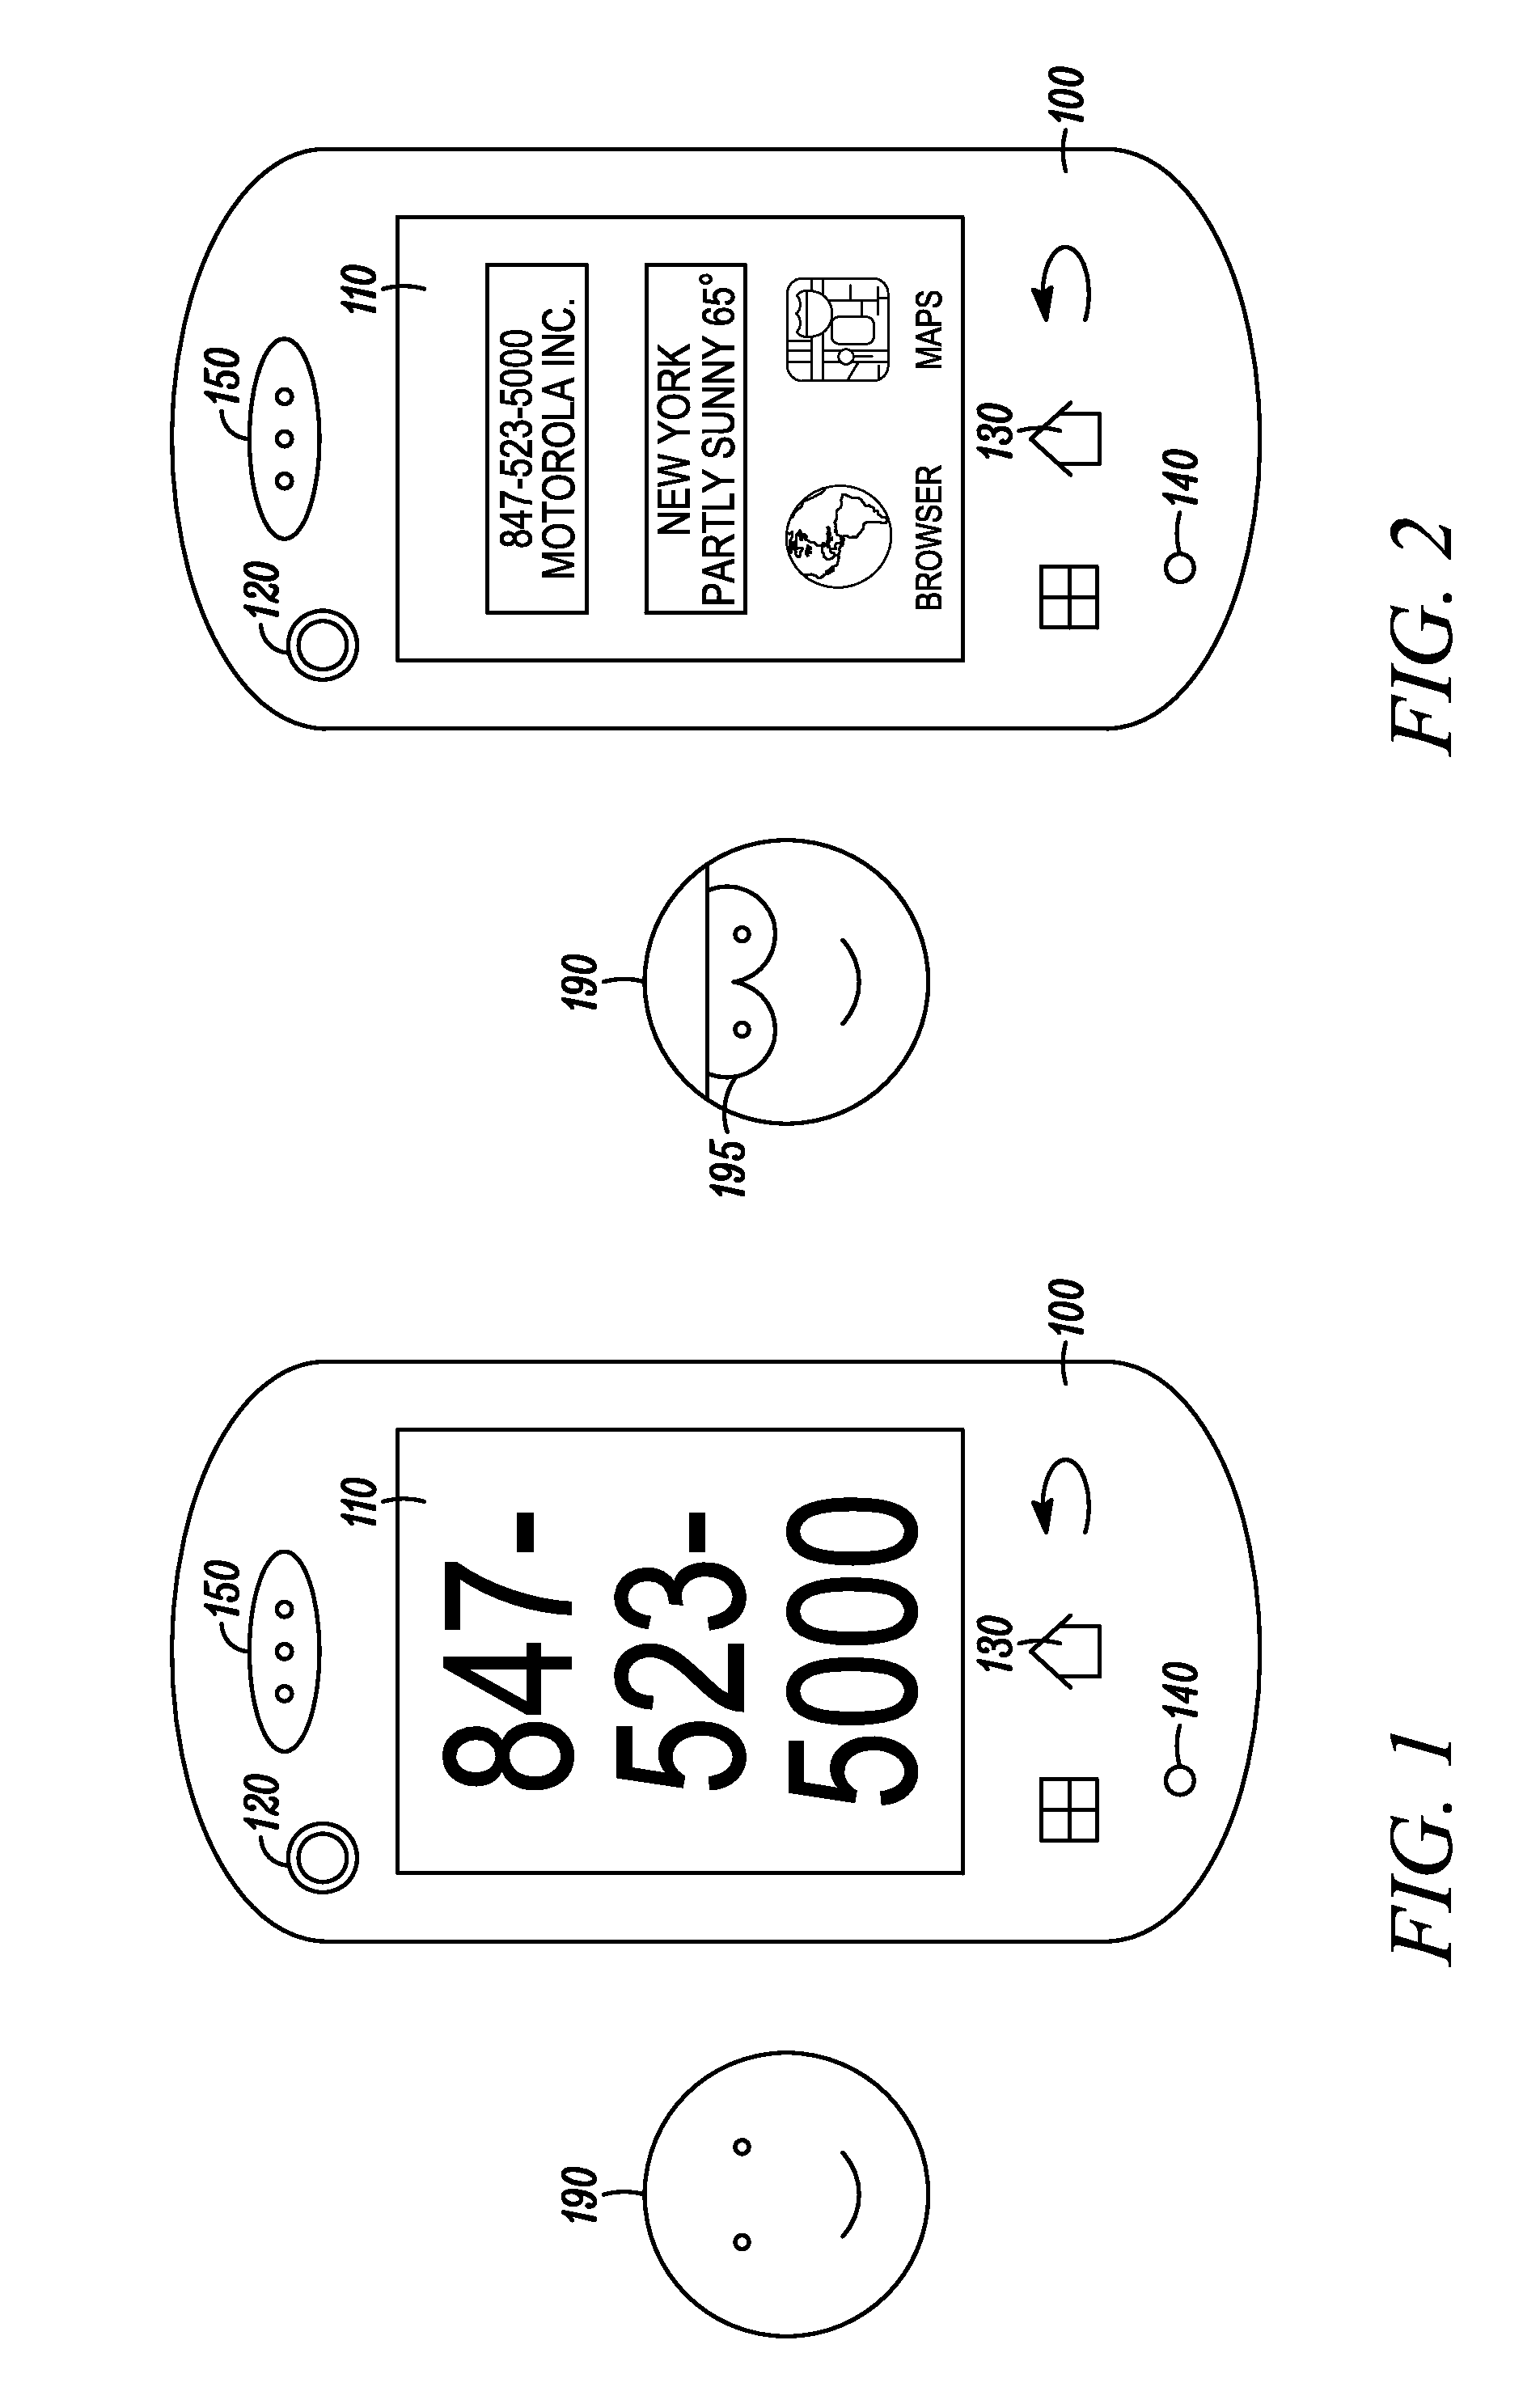 Method and Device for Visual Compensation